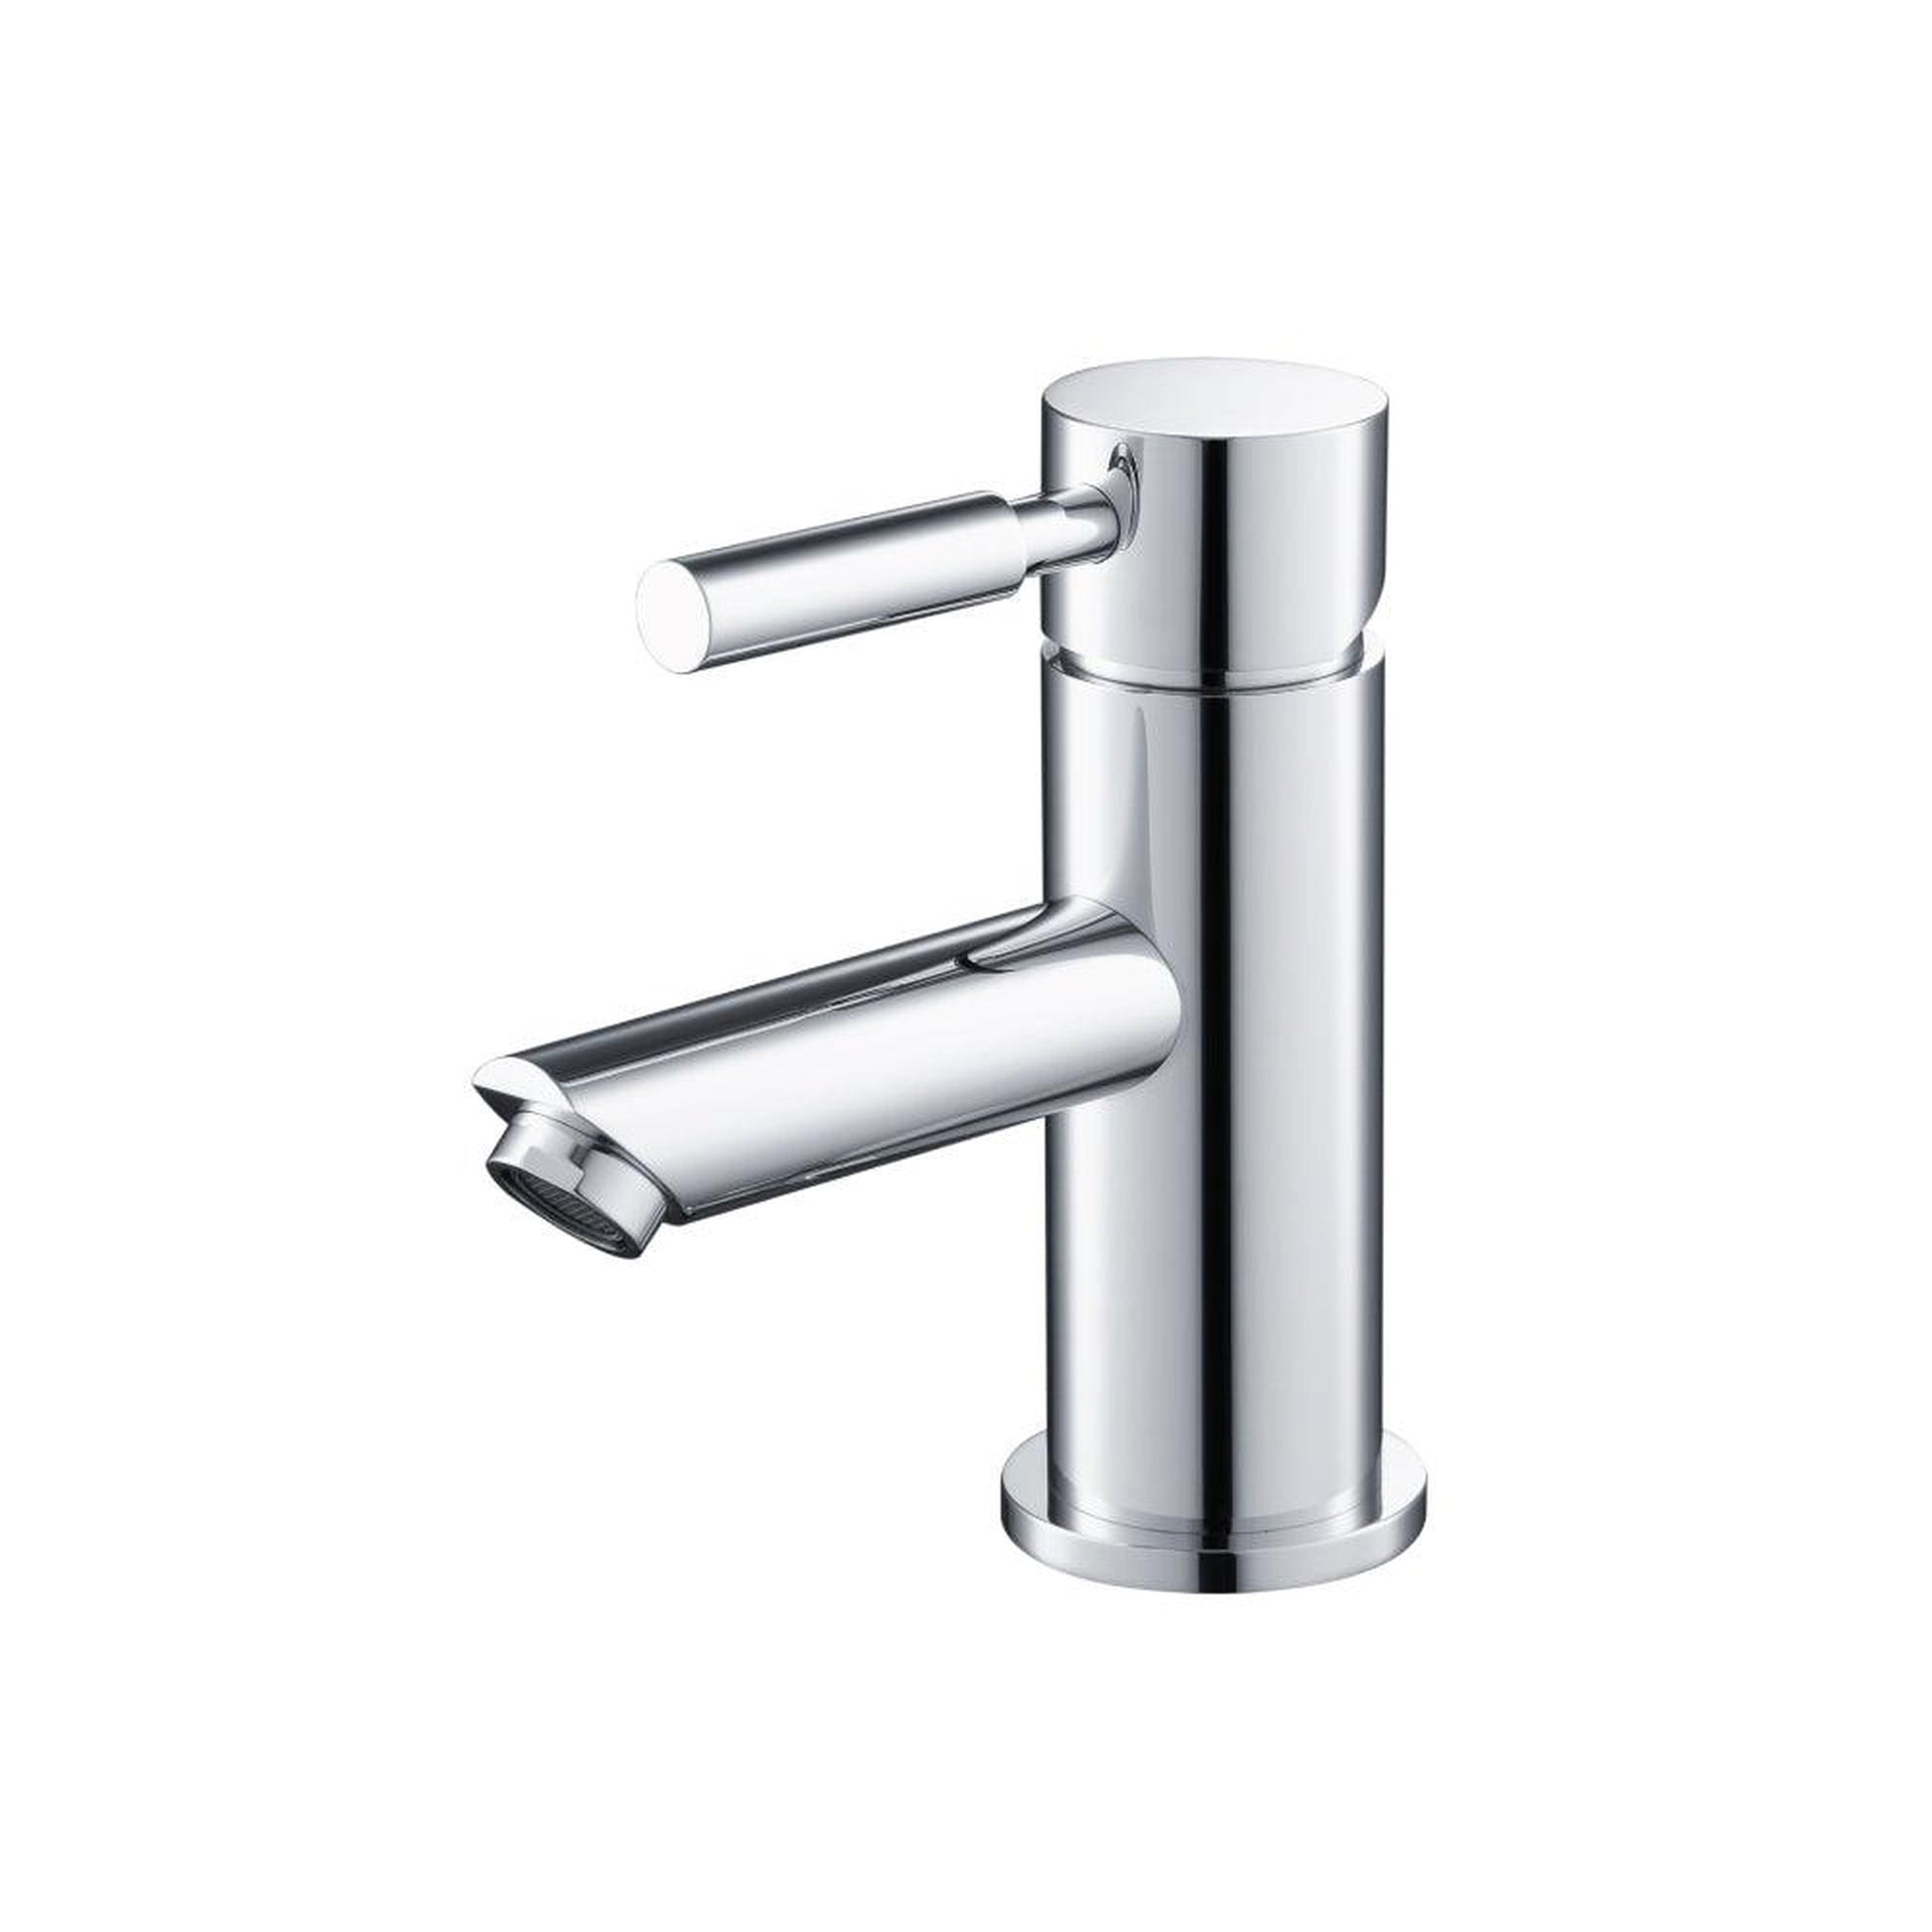 Isenberg Serie 100 6" Single-Hole Brushed Nickel PVD Deck-Mounted Bathroom Sink Faucet With Pop-Up Drain